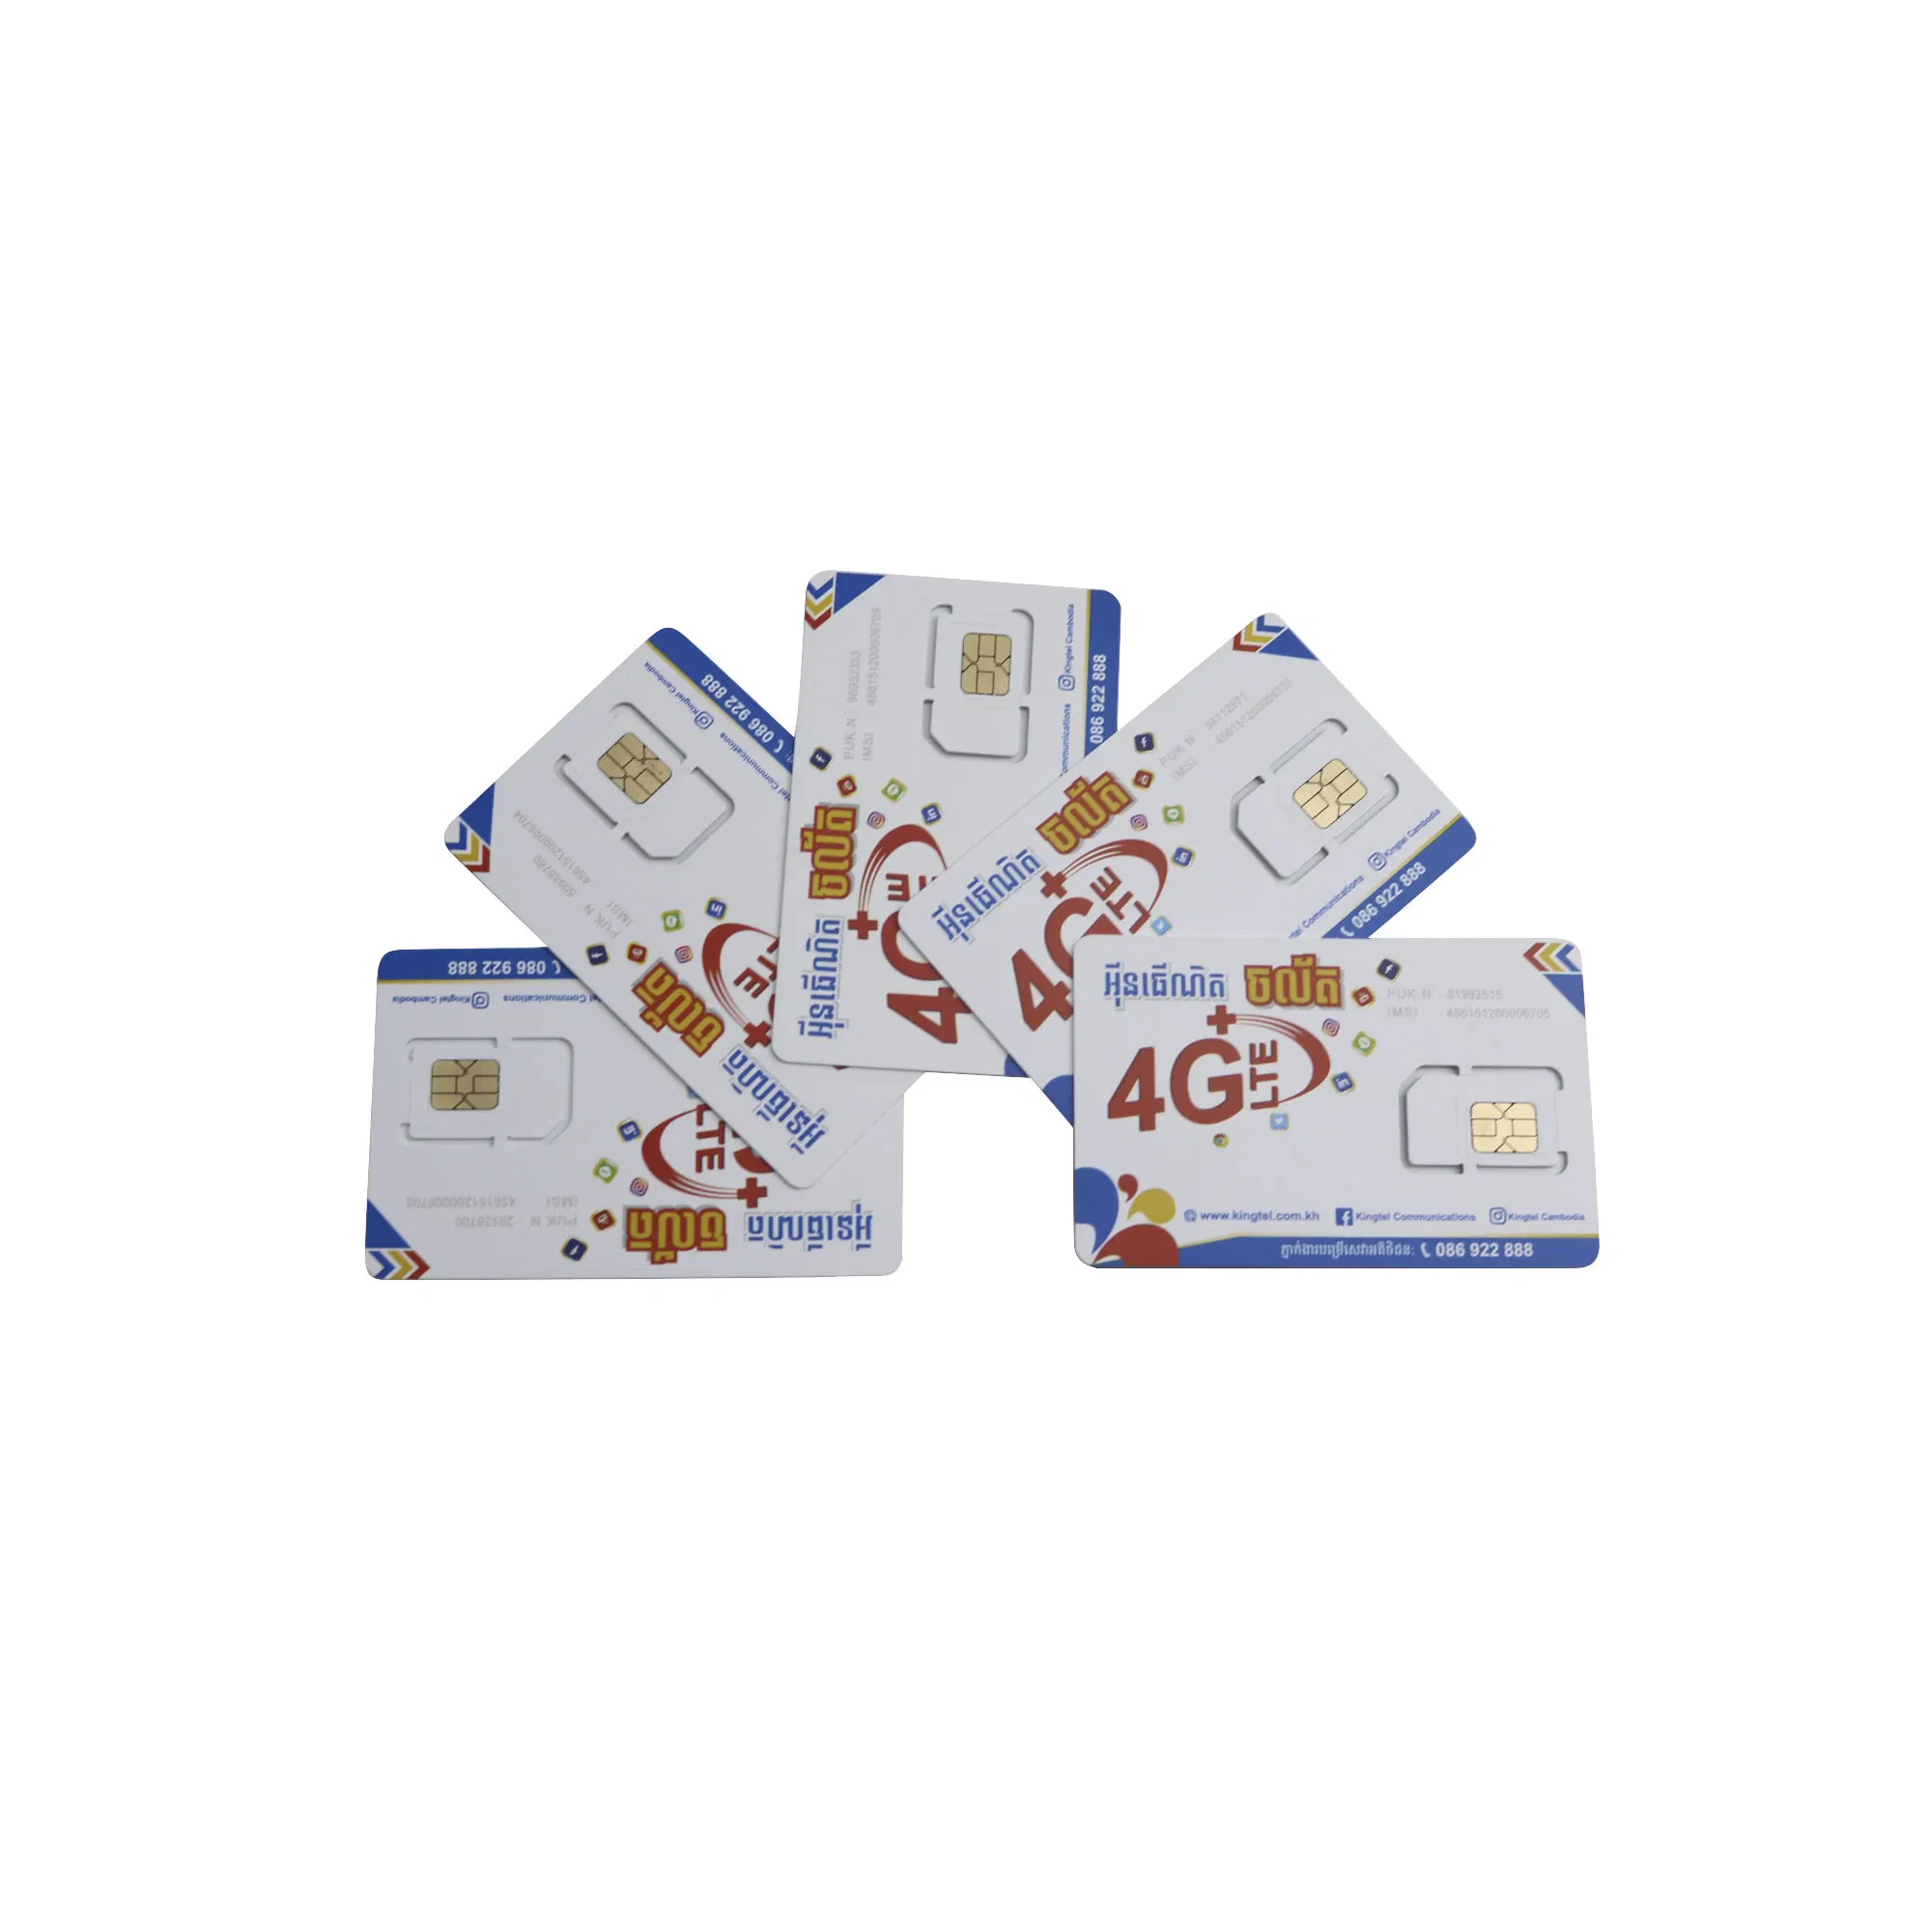 Tsinghua Unigroup 4G Programmable ABS SIM Card for Mobile Phone SIM Cards